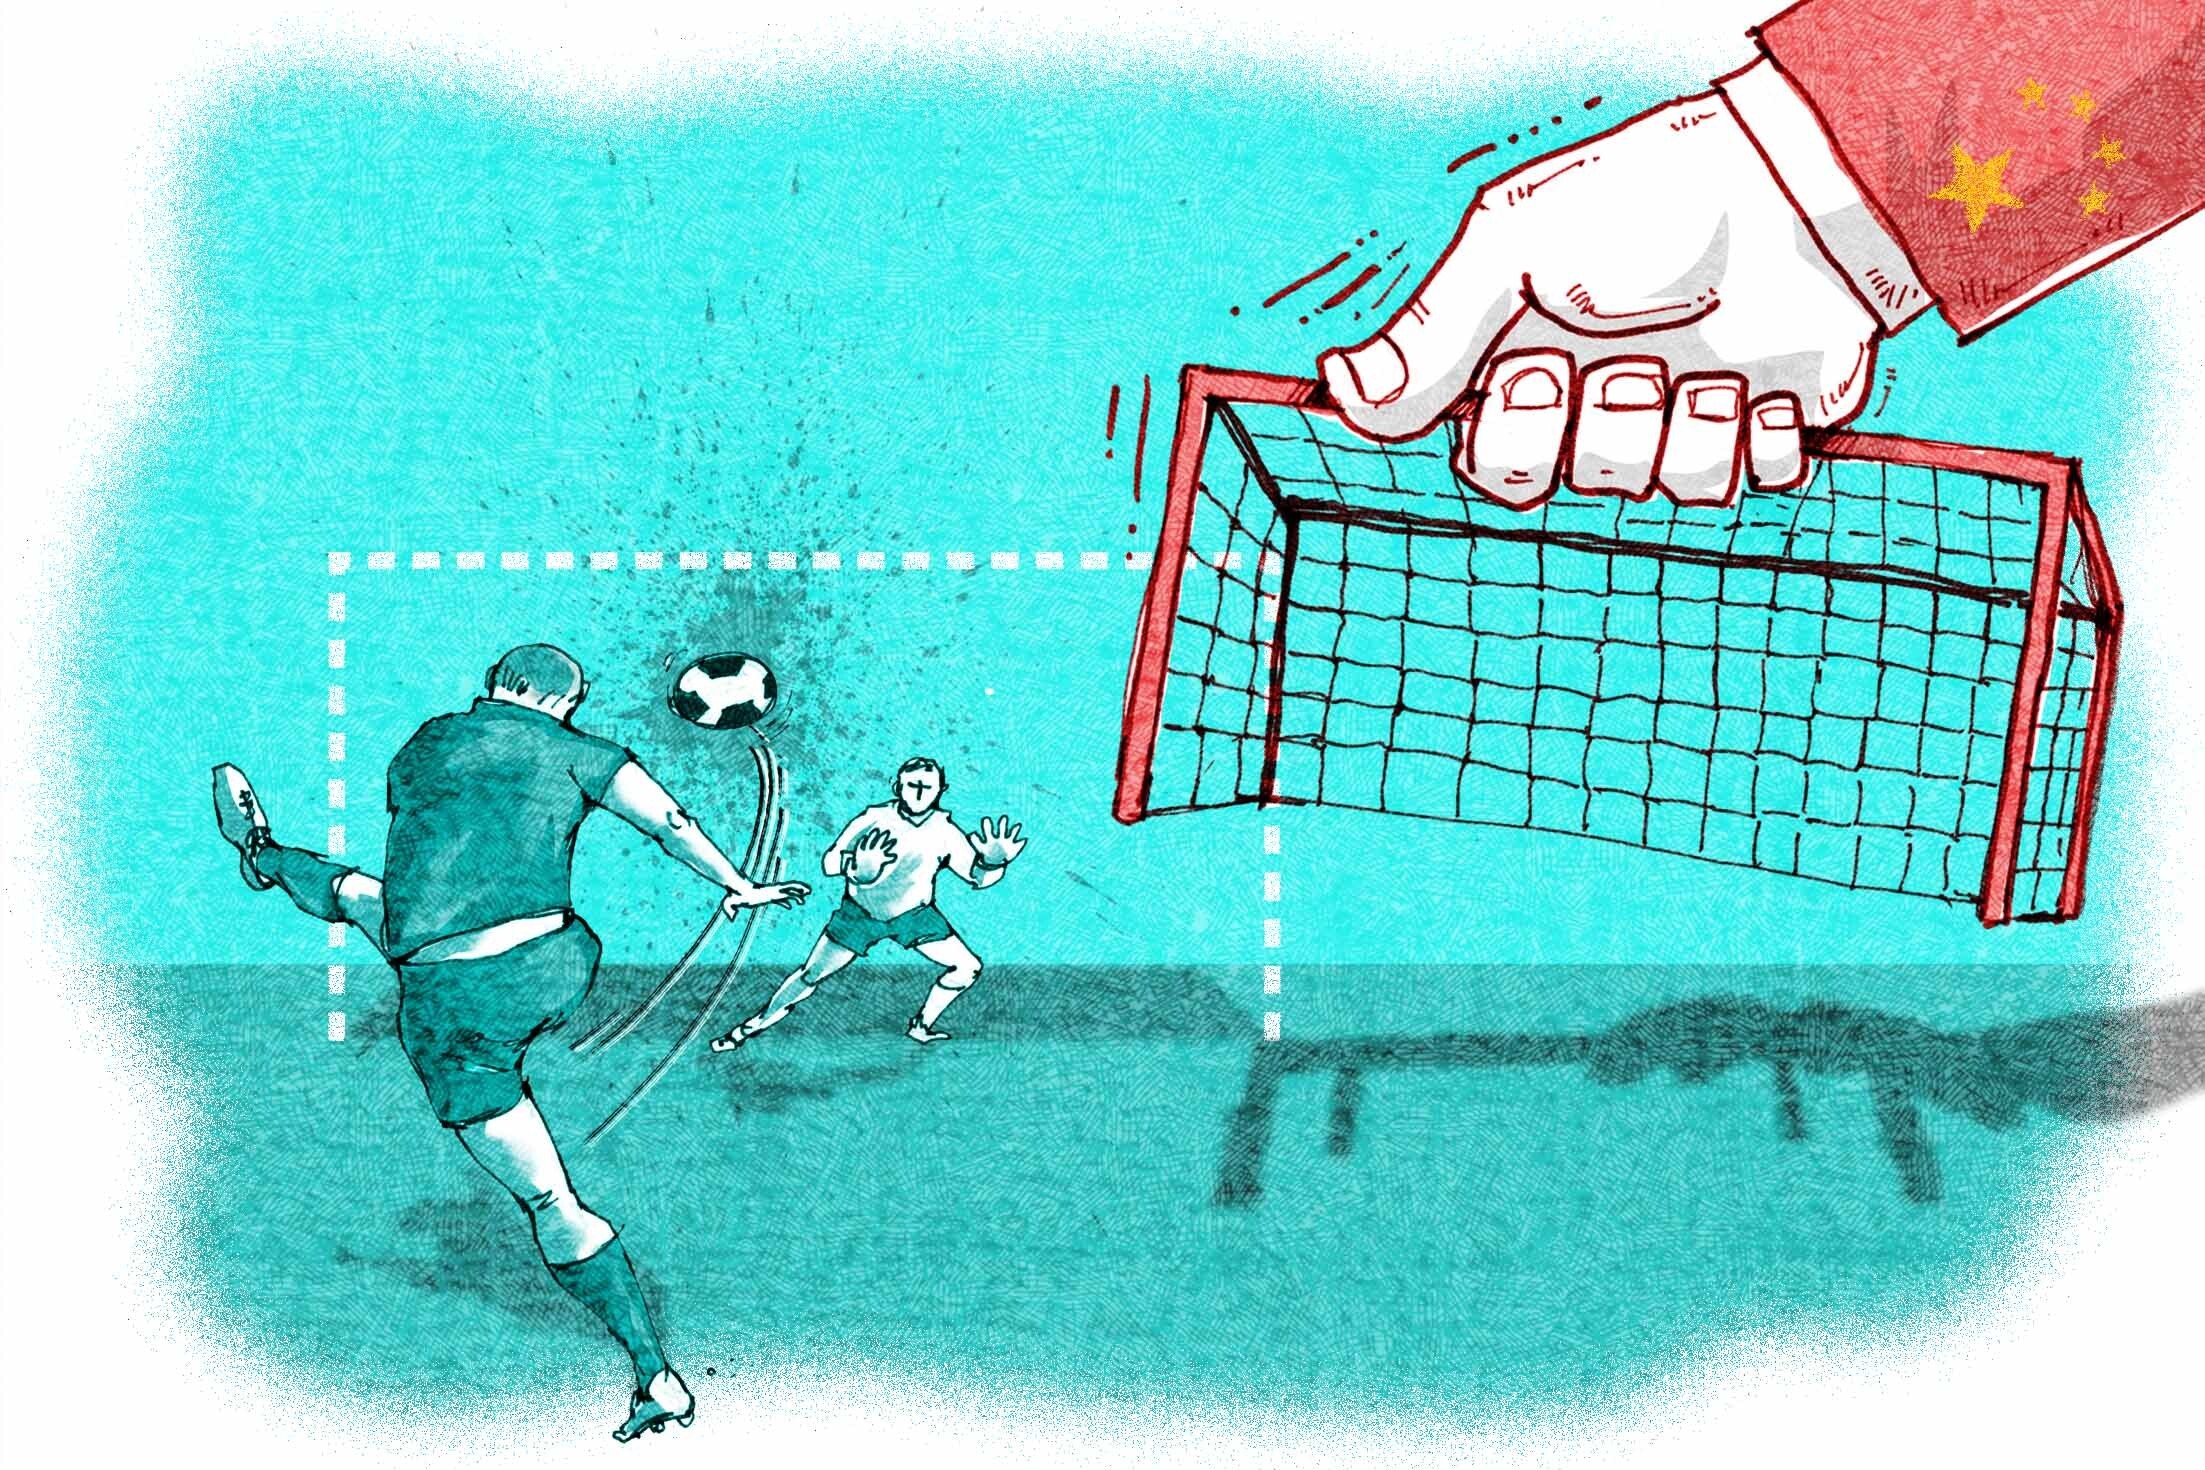 We have been ousted because Beijing fears us, banned opposition candidates say as they decry shifting goalposts. Illustration: SCMP